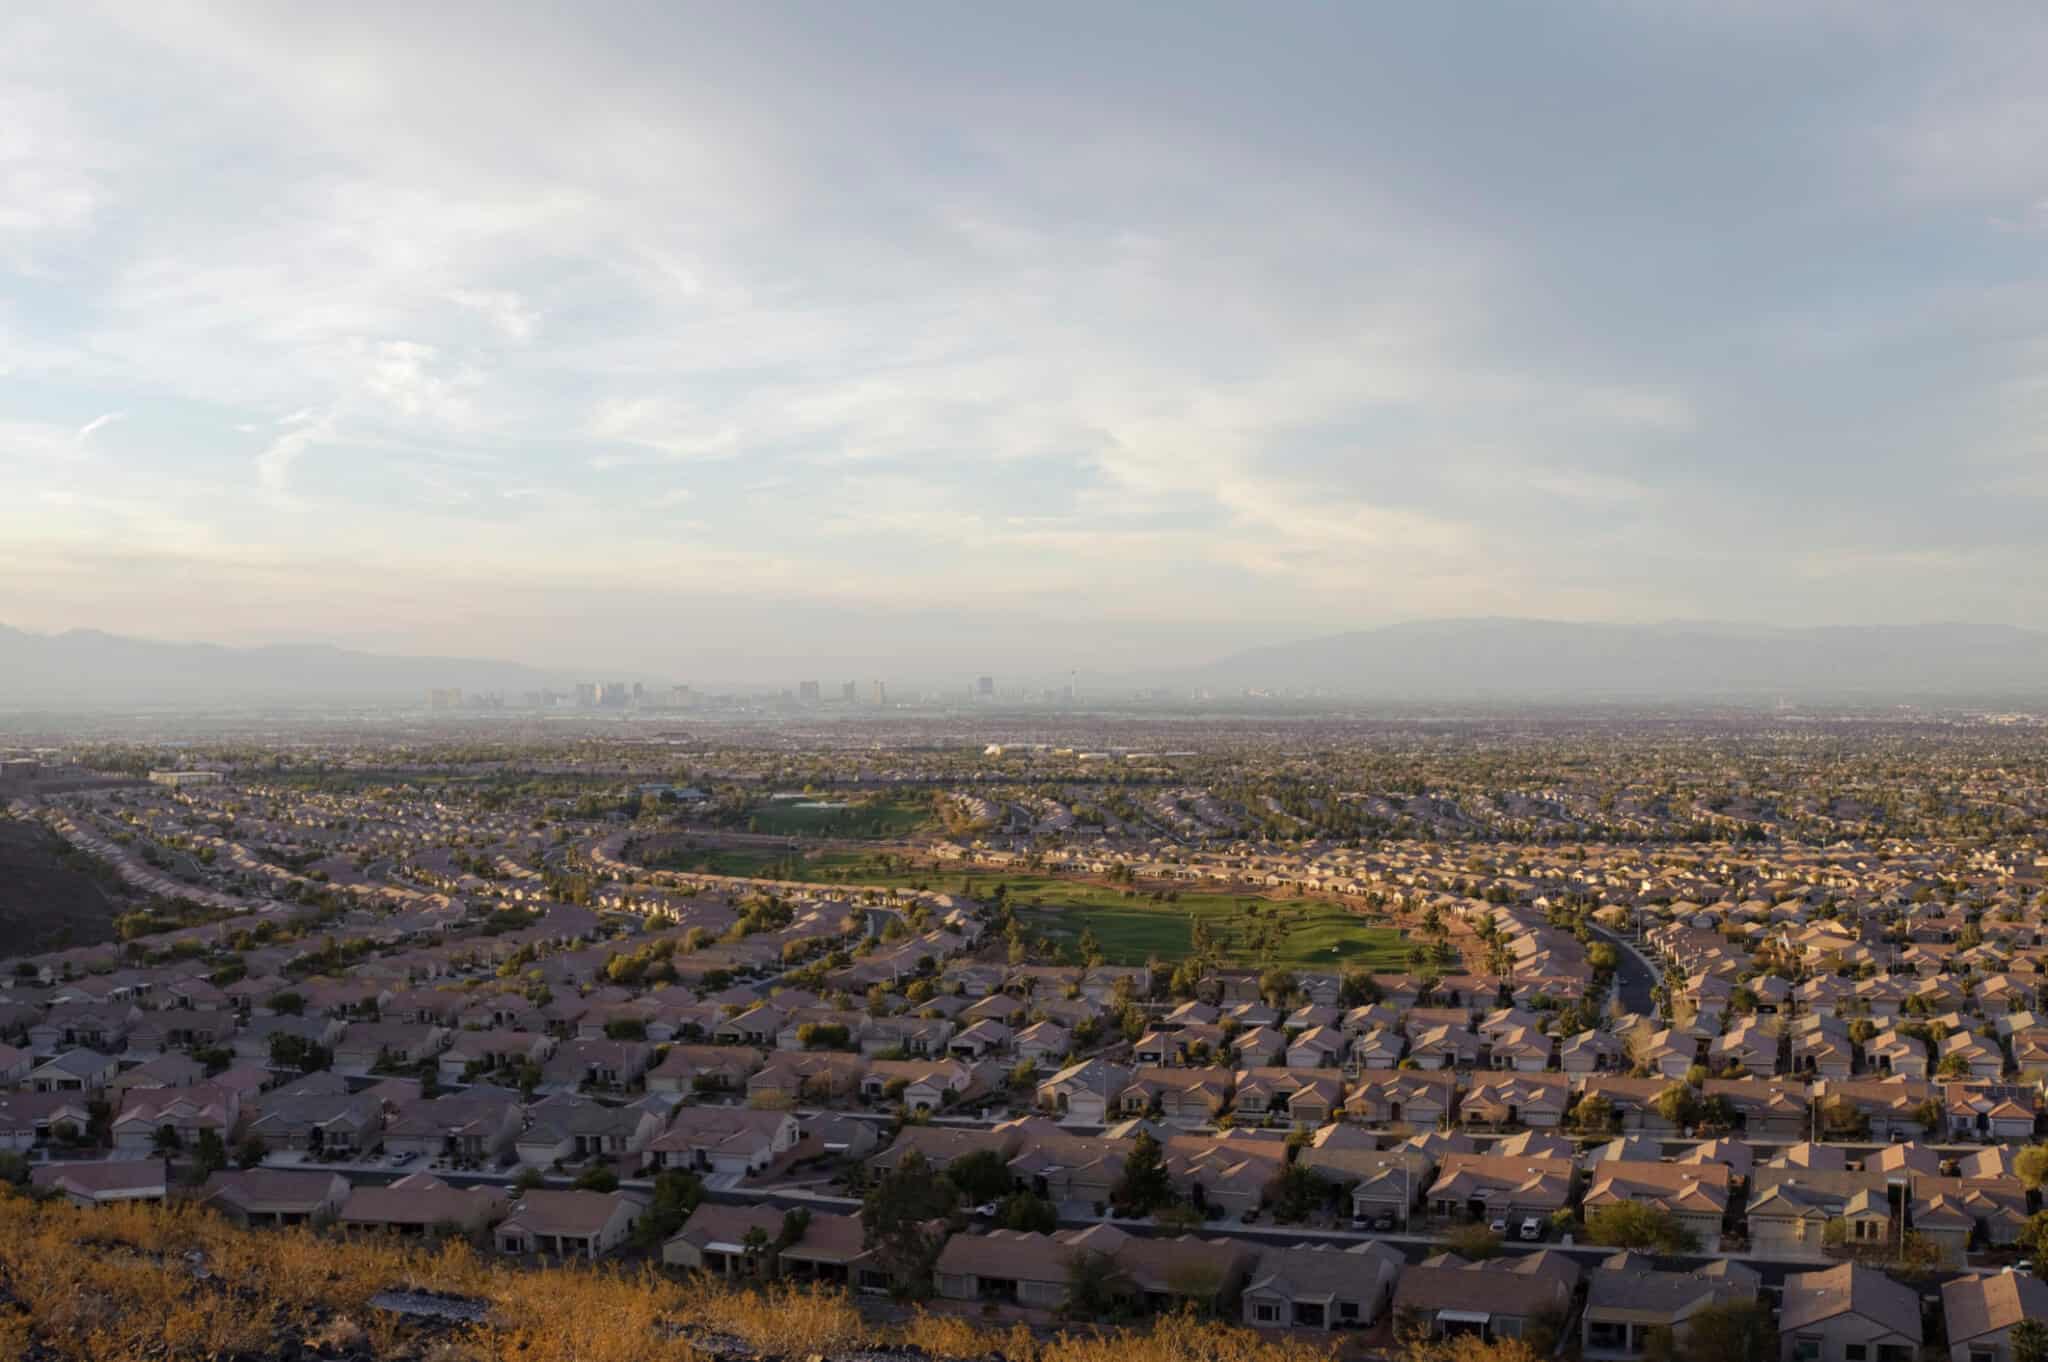 Wide angle image of the Vegas Valley from the Seven Hills planned community at the southeast side. The Las Vegas strip and downtown hotel / casinos are visible through the afternoon haze.